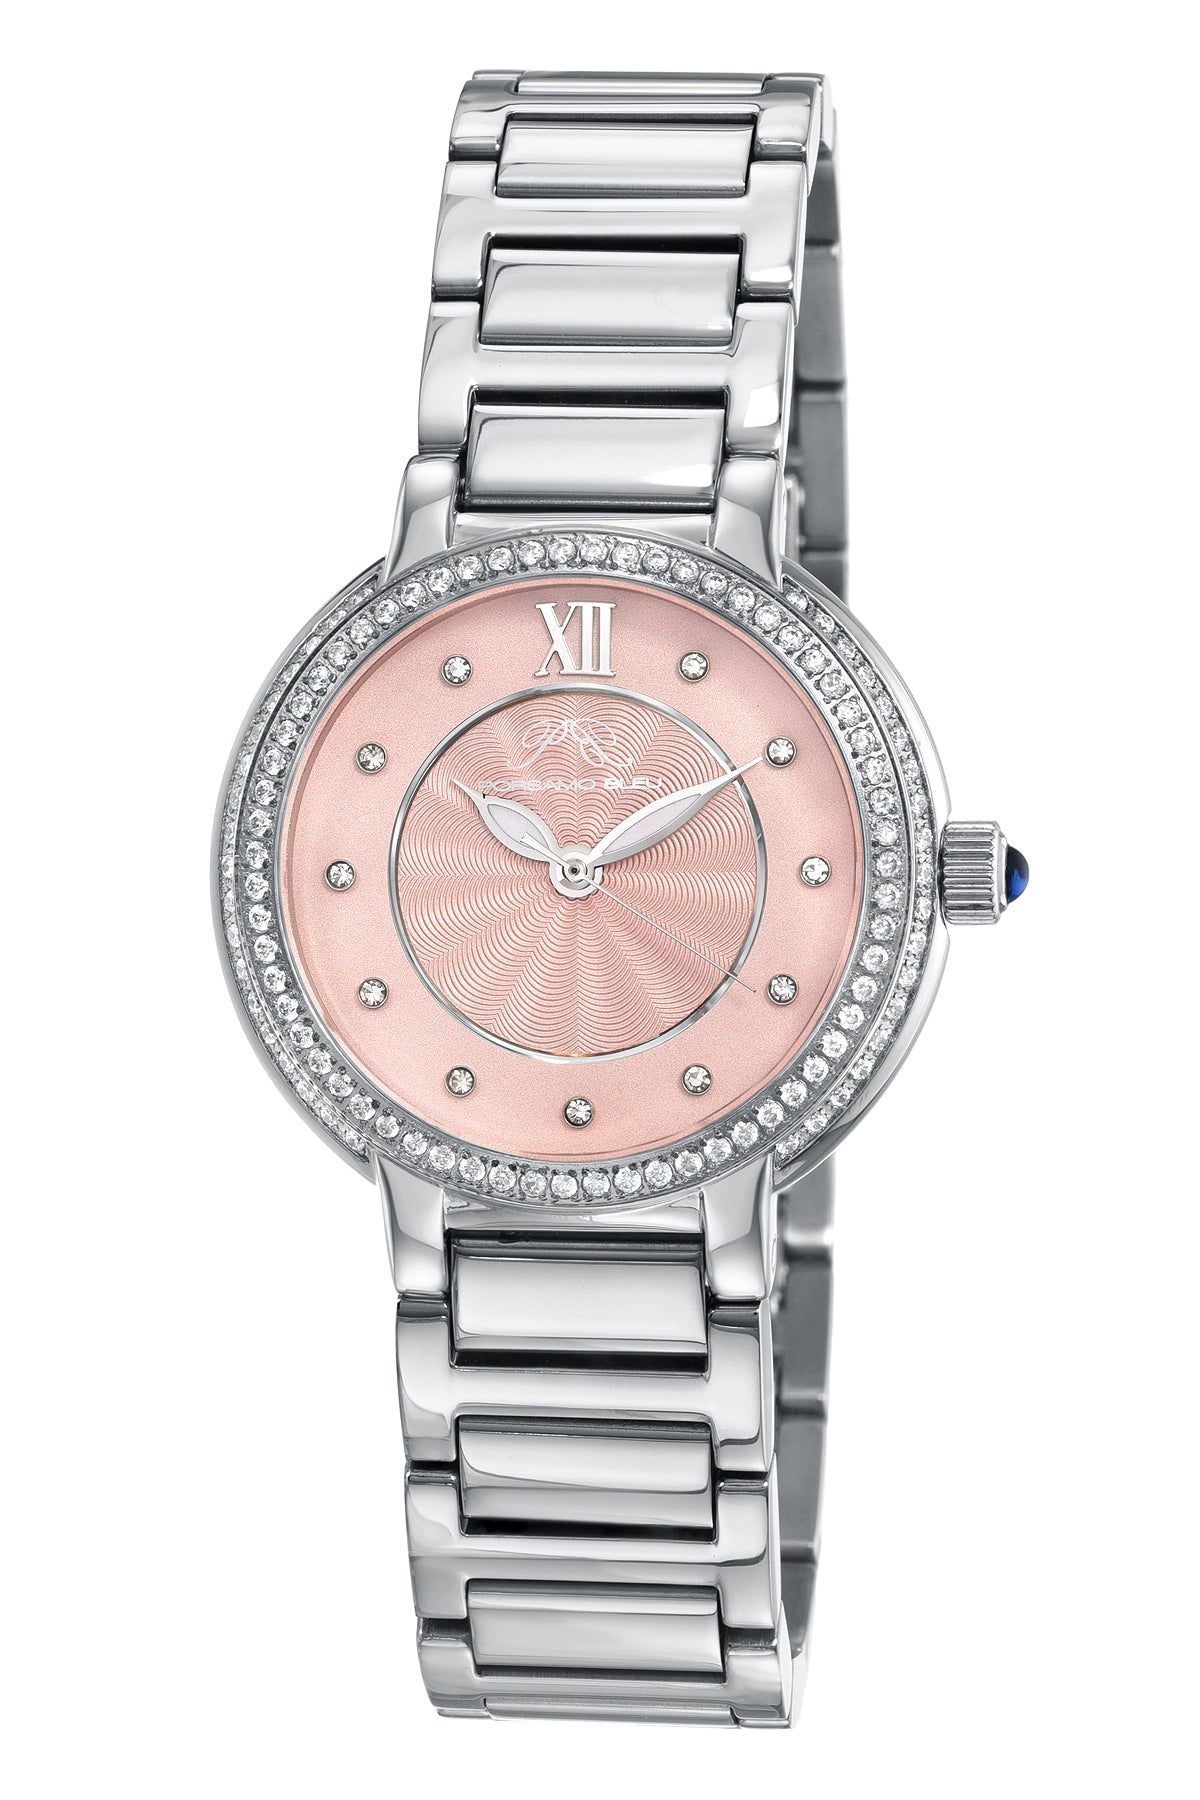 Porsamo Bleu Stella Luxury Crystal Womens Stainless Steel Watch, Silver With Baby Pink Guilloche And Sunray Dial 1191FSTS